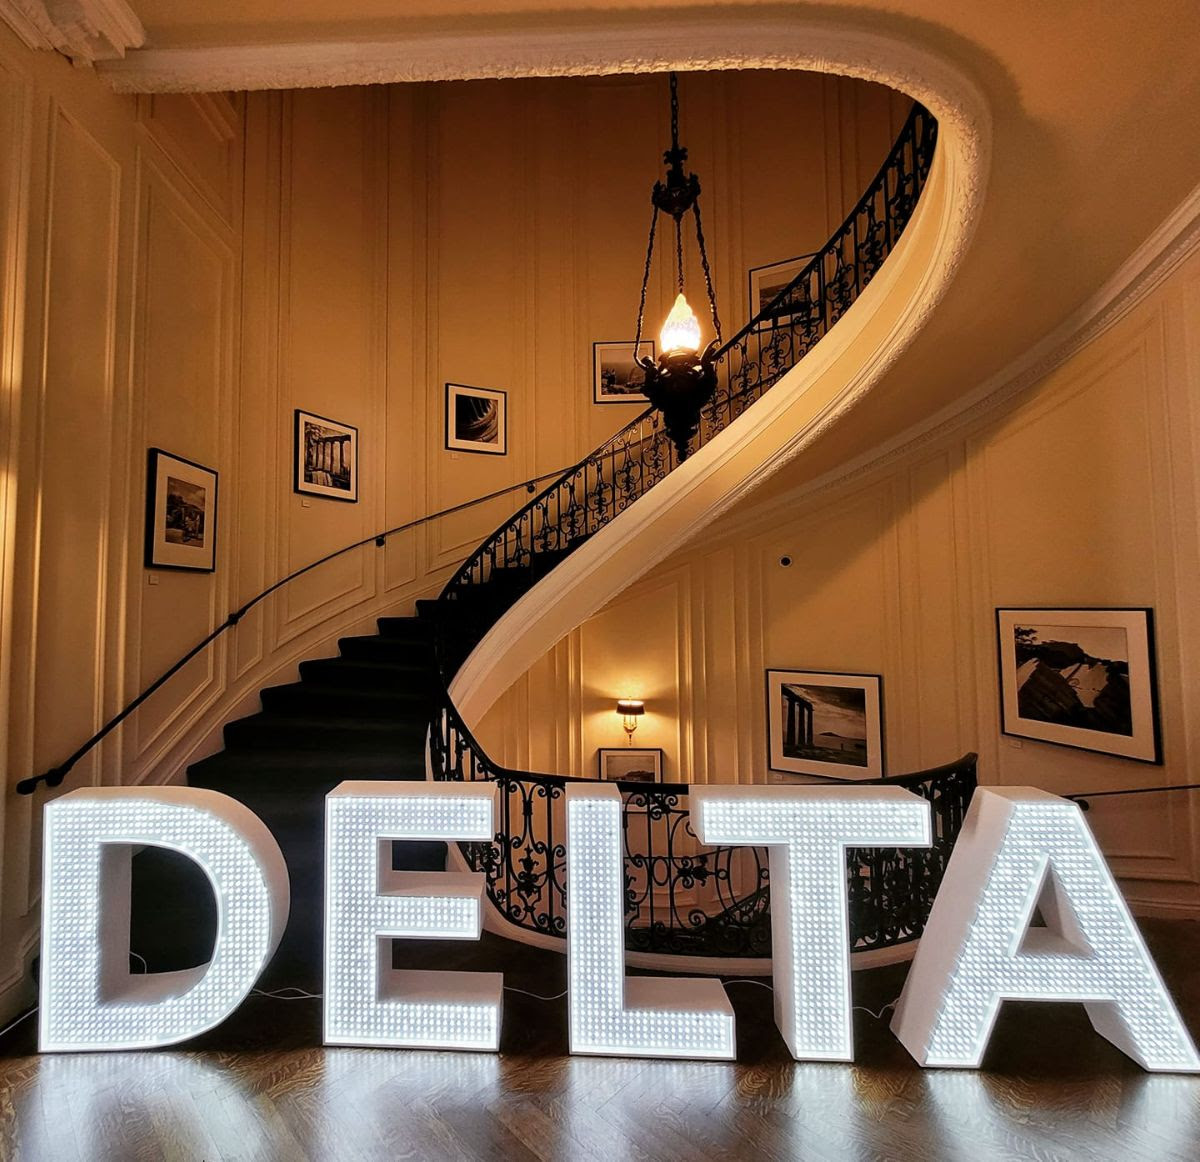 athens-and-boston-to-become-twin-cities-delta-launches-direct-flight1